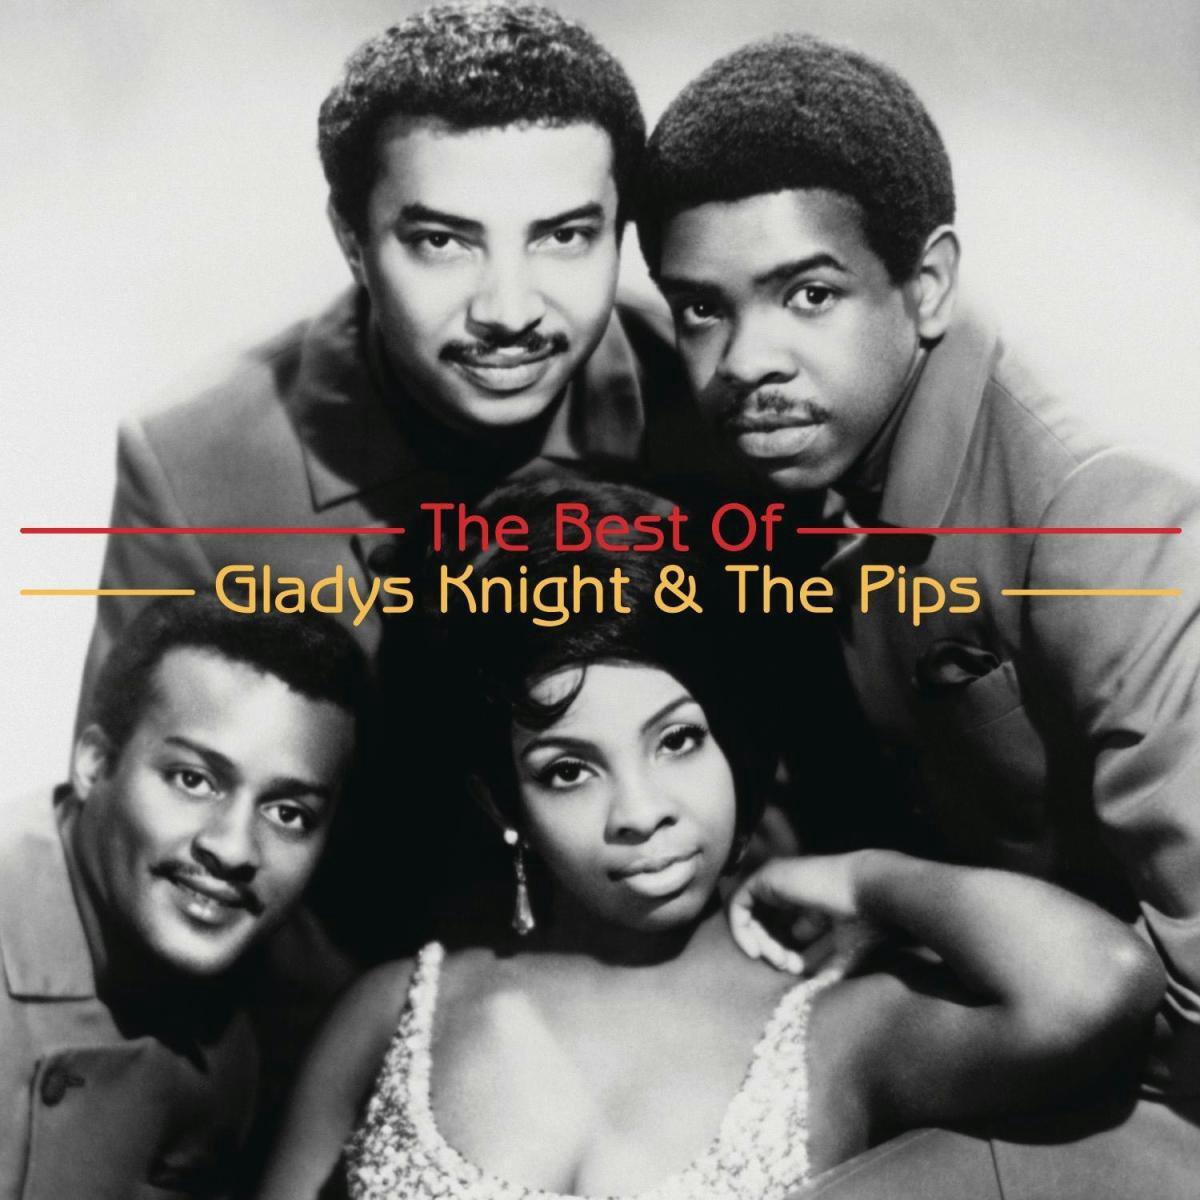 The Greatest Hits - Gladys & The Pips Knight